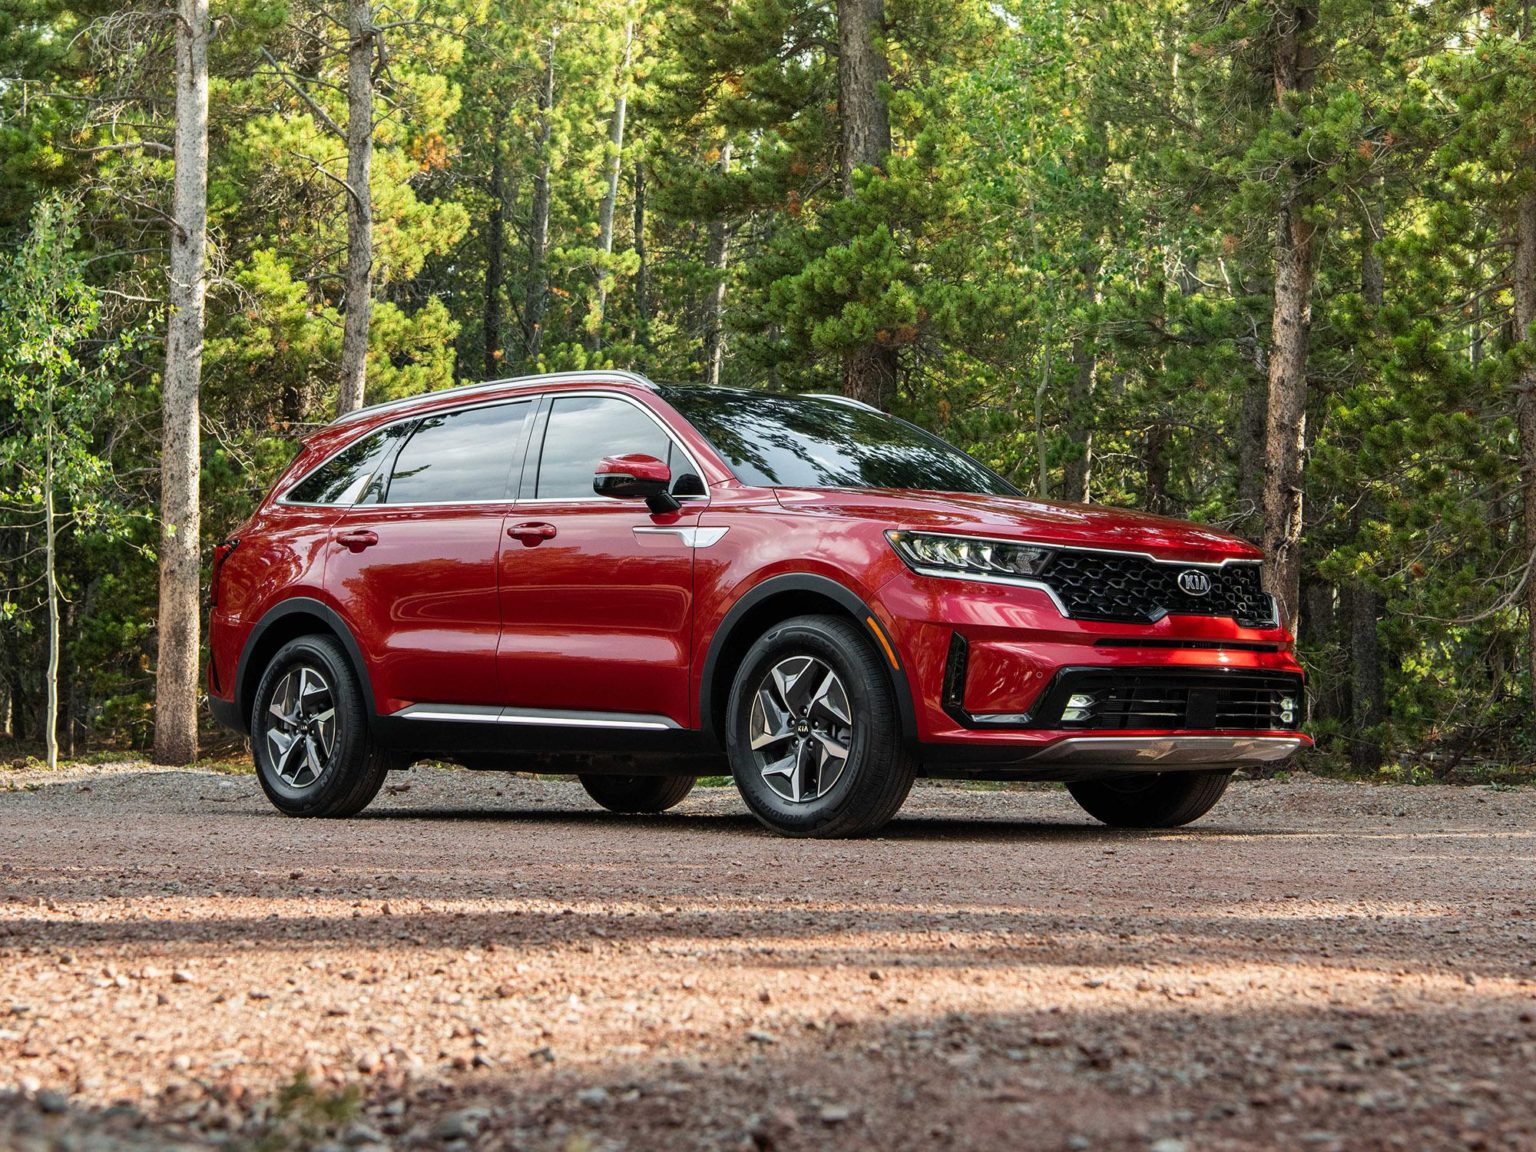 Kia is offering the Sorento SUV in a hybrid form for the 2021 model year.